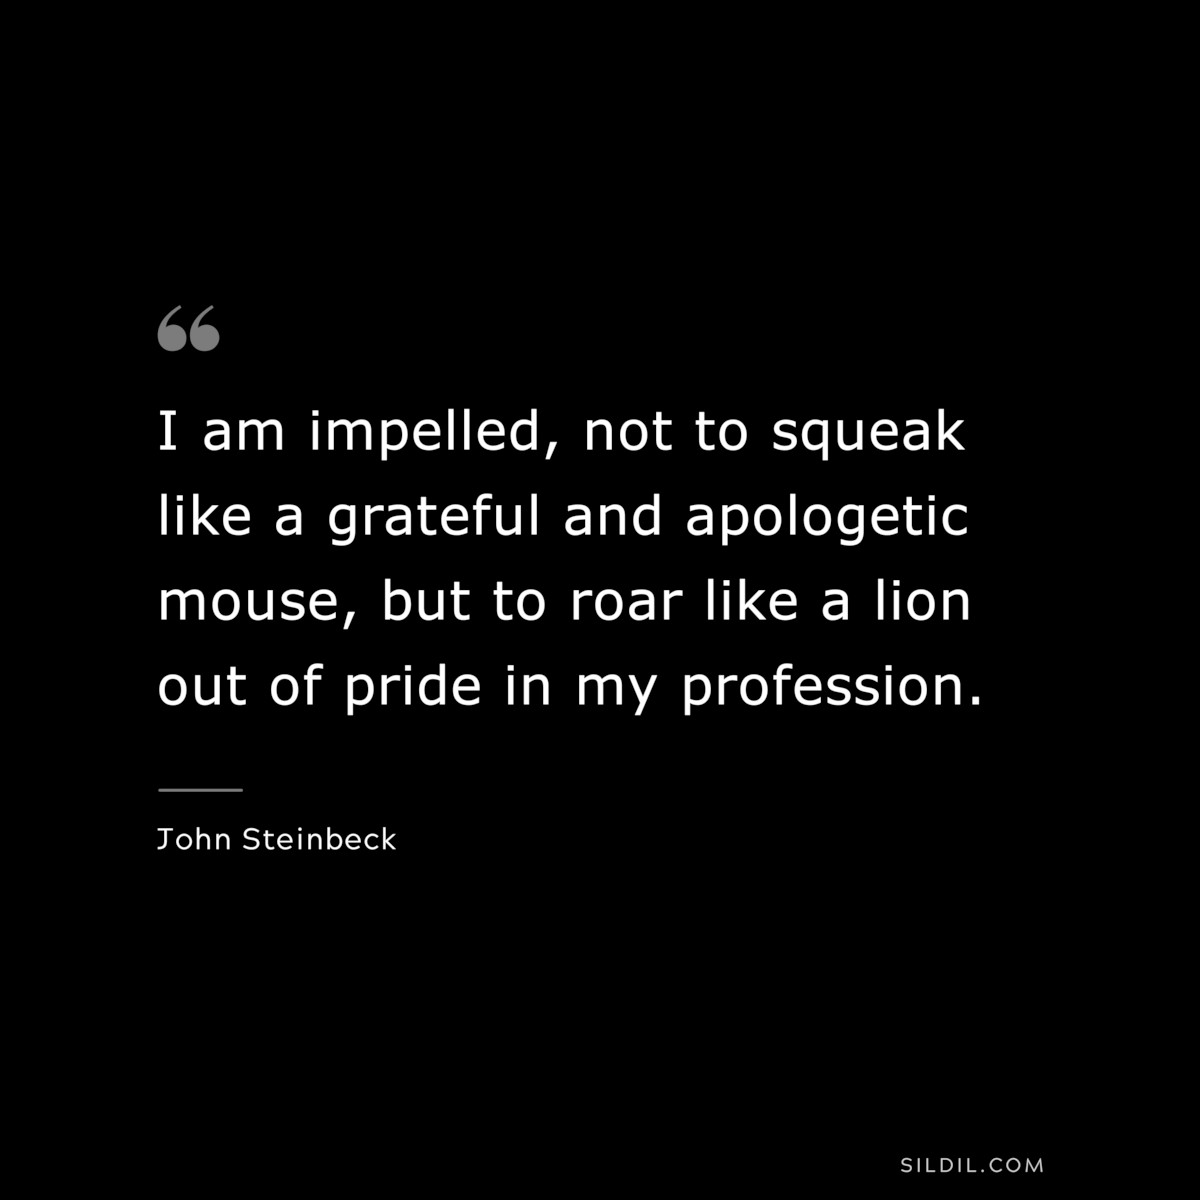 I am impelled, not to squeak like a grateful and apologetic mouse, but to roar like a lion out of pride in my profession.― John Steinbeck